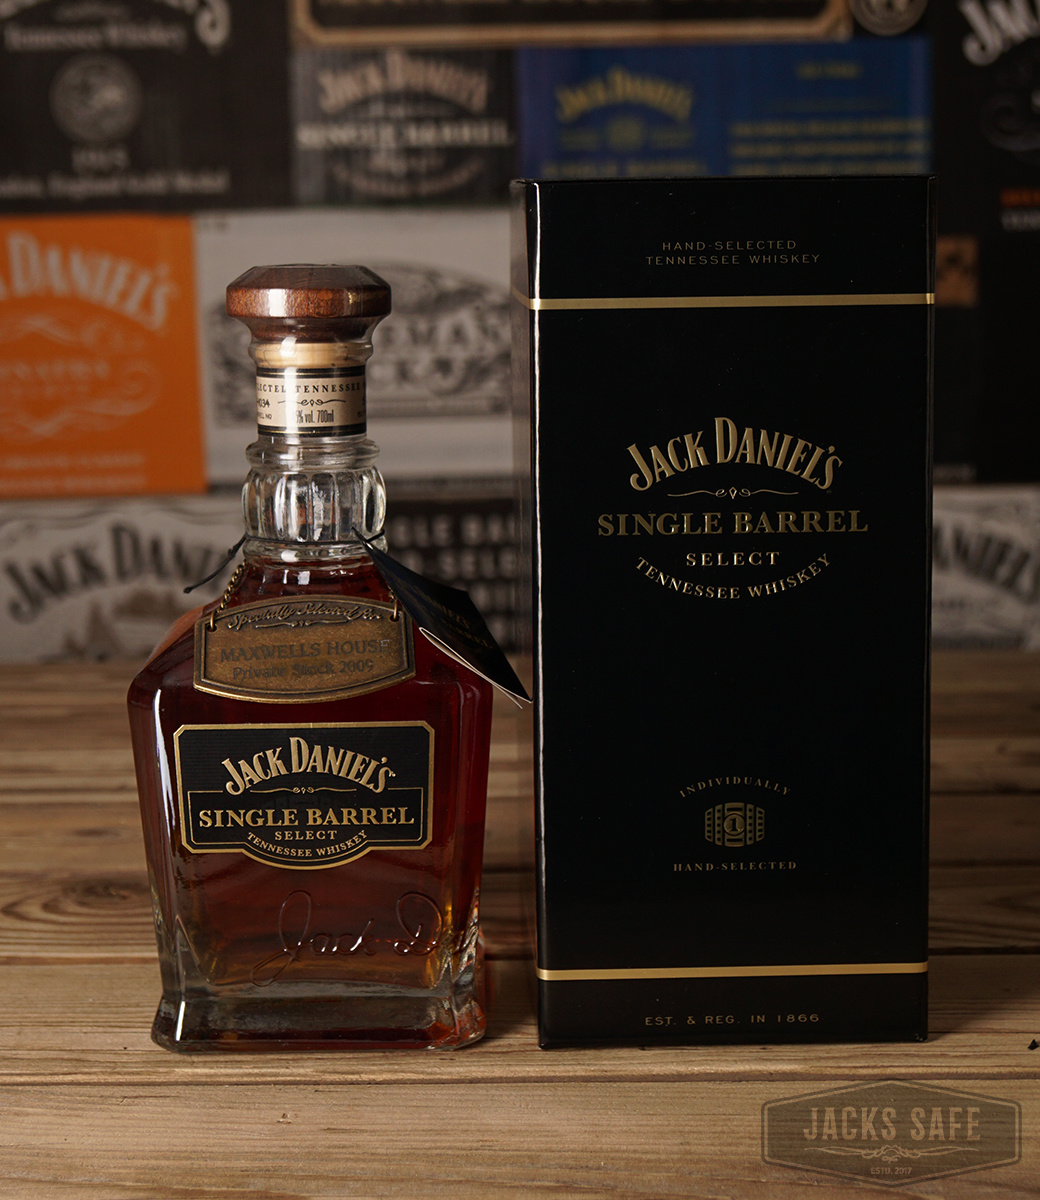 JACK DANIEL'S - Single Barrel - Select - Personal Collection - Maxwells House Private Stock - 5.12.09 - GER - 45% - 700ml